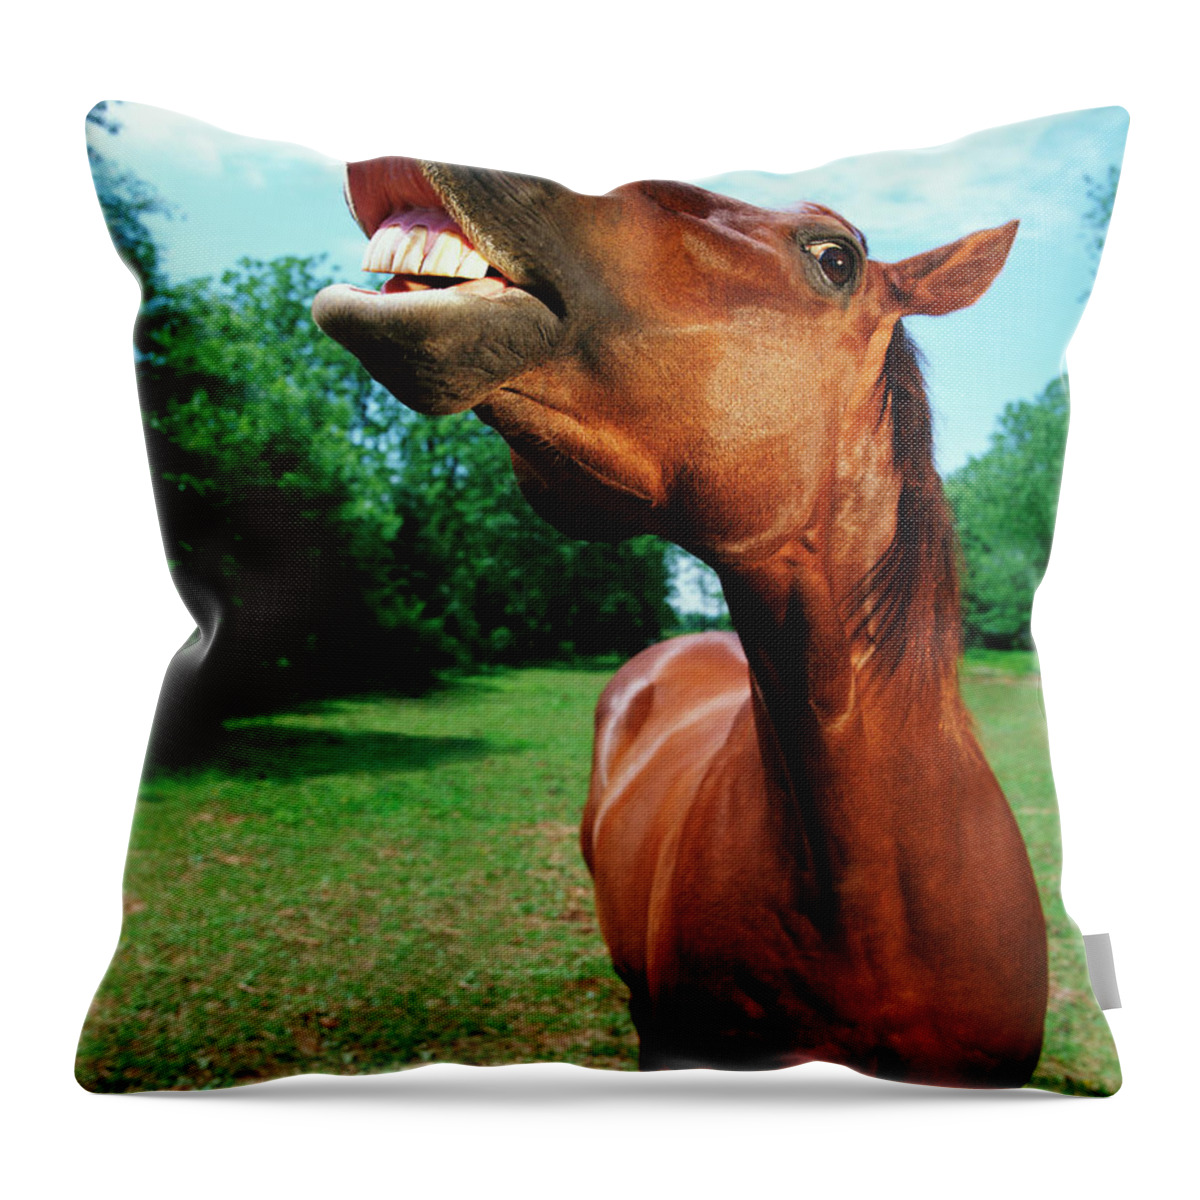 Horse Throw Pillow featuring the photograph Horse Neighing by Digital Vision.